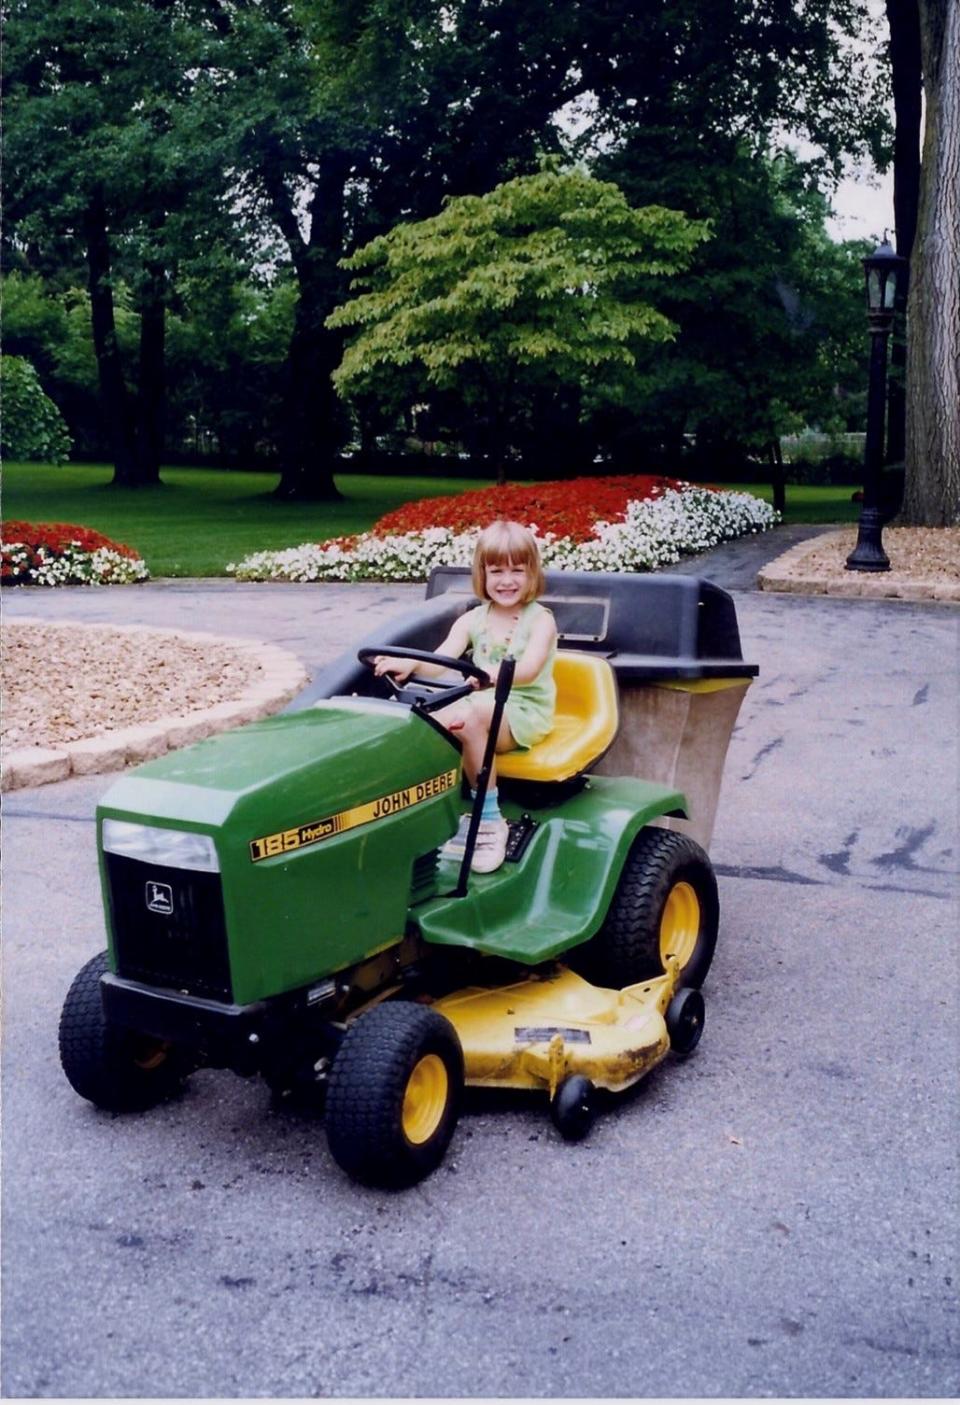 Megan Gegesky, seen here in 1996 on the family tractor at home in Grosse Ile, fell in love with mechanical things early and now plays a key role in the launch of the 2022 Ford F-150 Lightning.